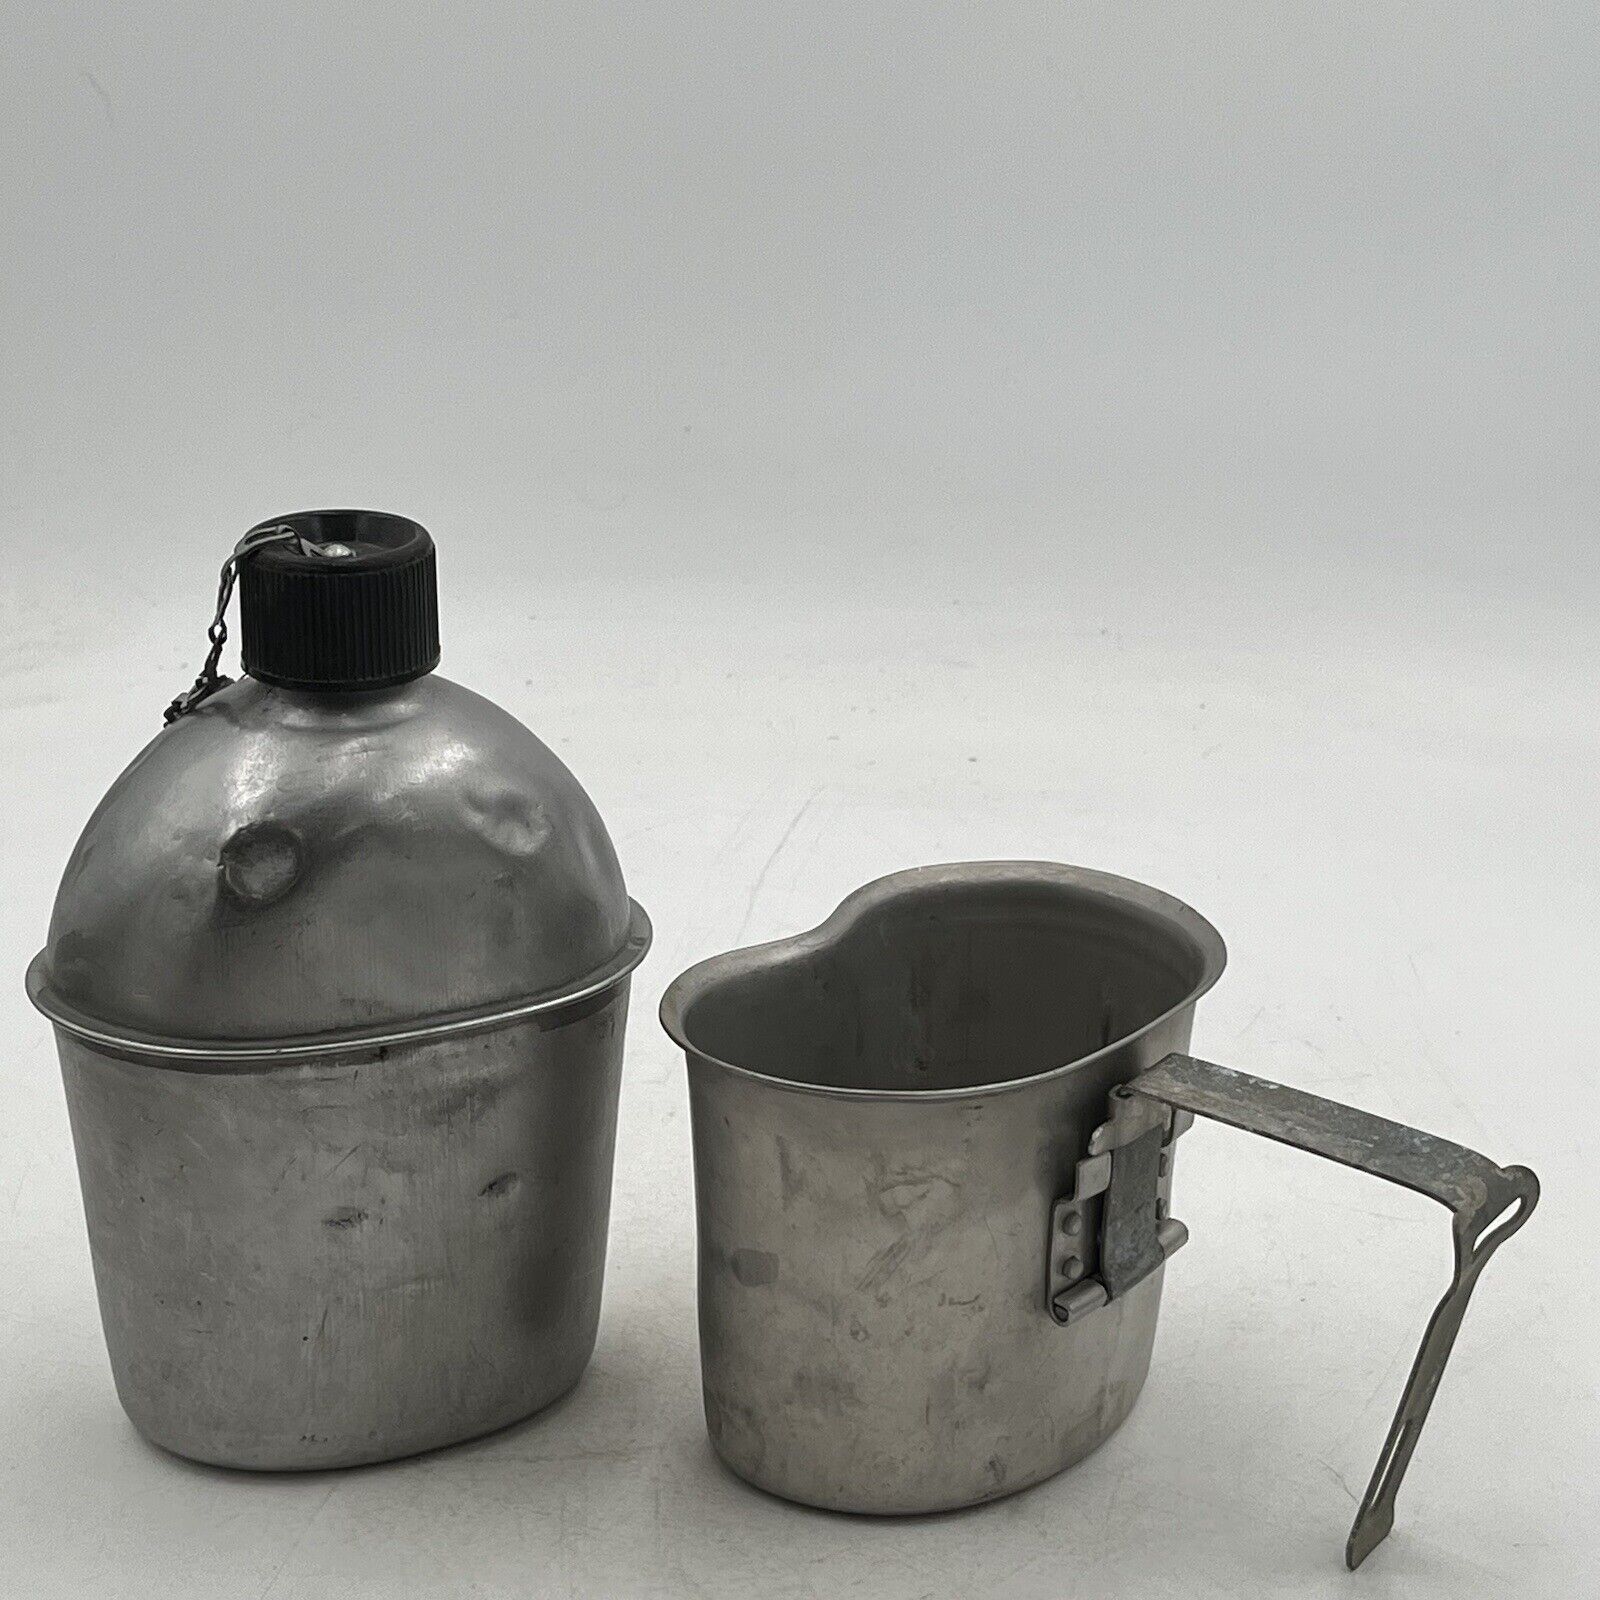 Original WWII US Army Canteen & Cup Dated 1945 WW2 S.M. Co. Vintage.